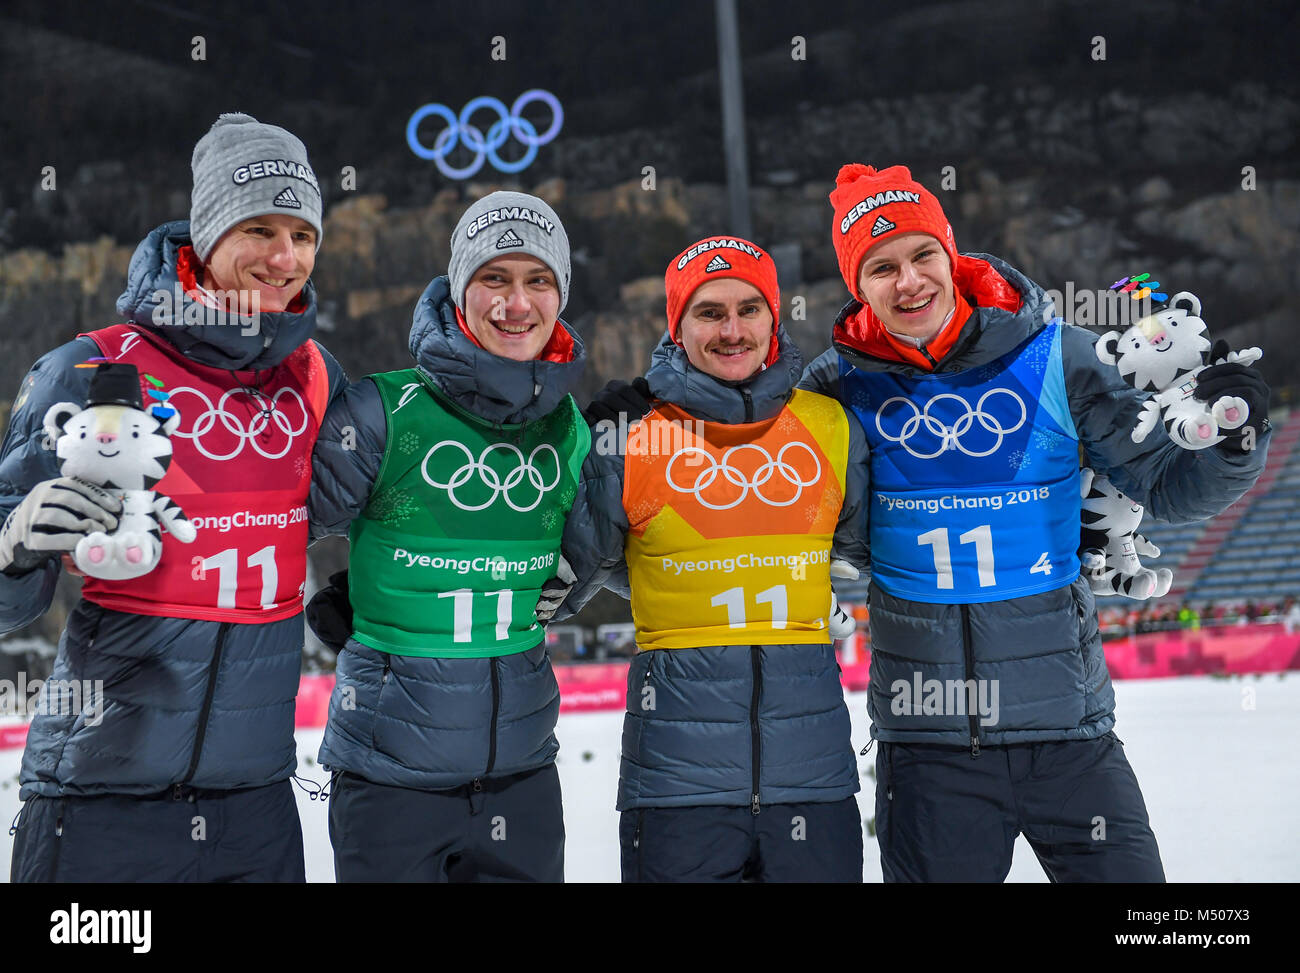 19 February 2018, South Korea, Pyeongchang, Olympics, ski jumping, team  jumping, large hill, mens, Alpensia Sliding Centre: Karl Geiger (L-R),  Stephan Leyhe, Richard Freitag and Andreas Wellinger of Germany  celebrating. They jointly